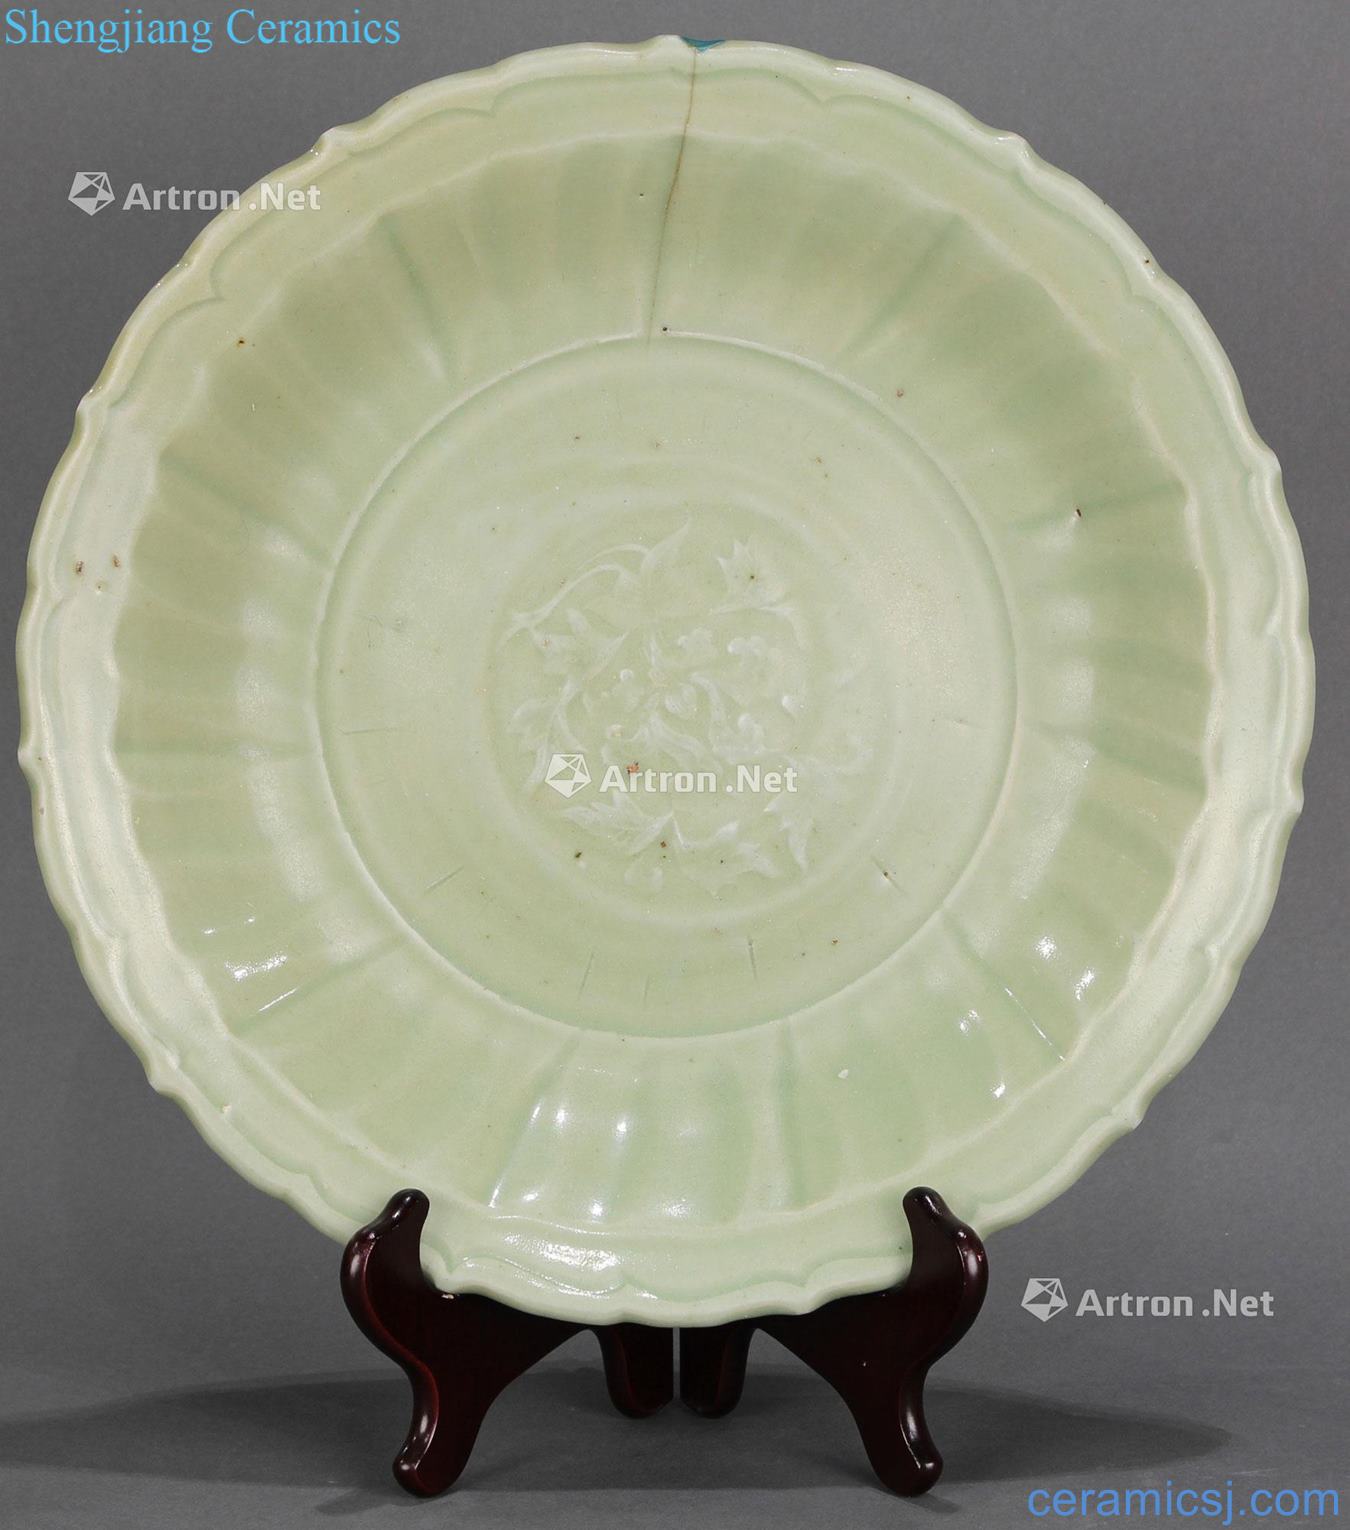 Ming yue ware shape embossing plate